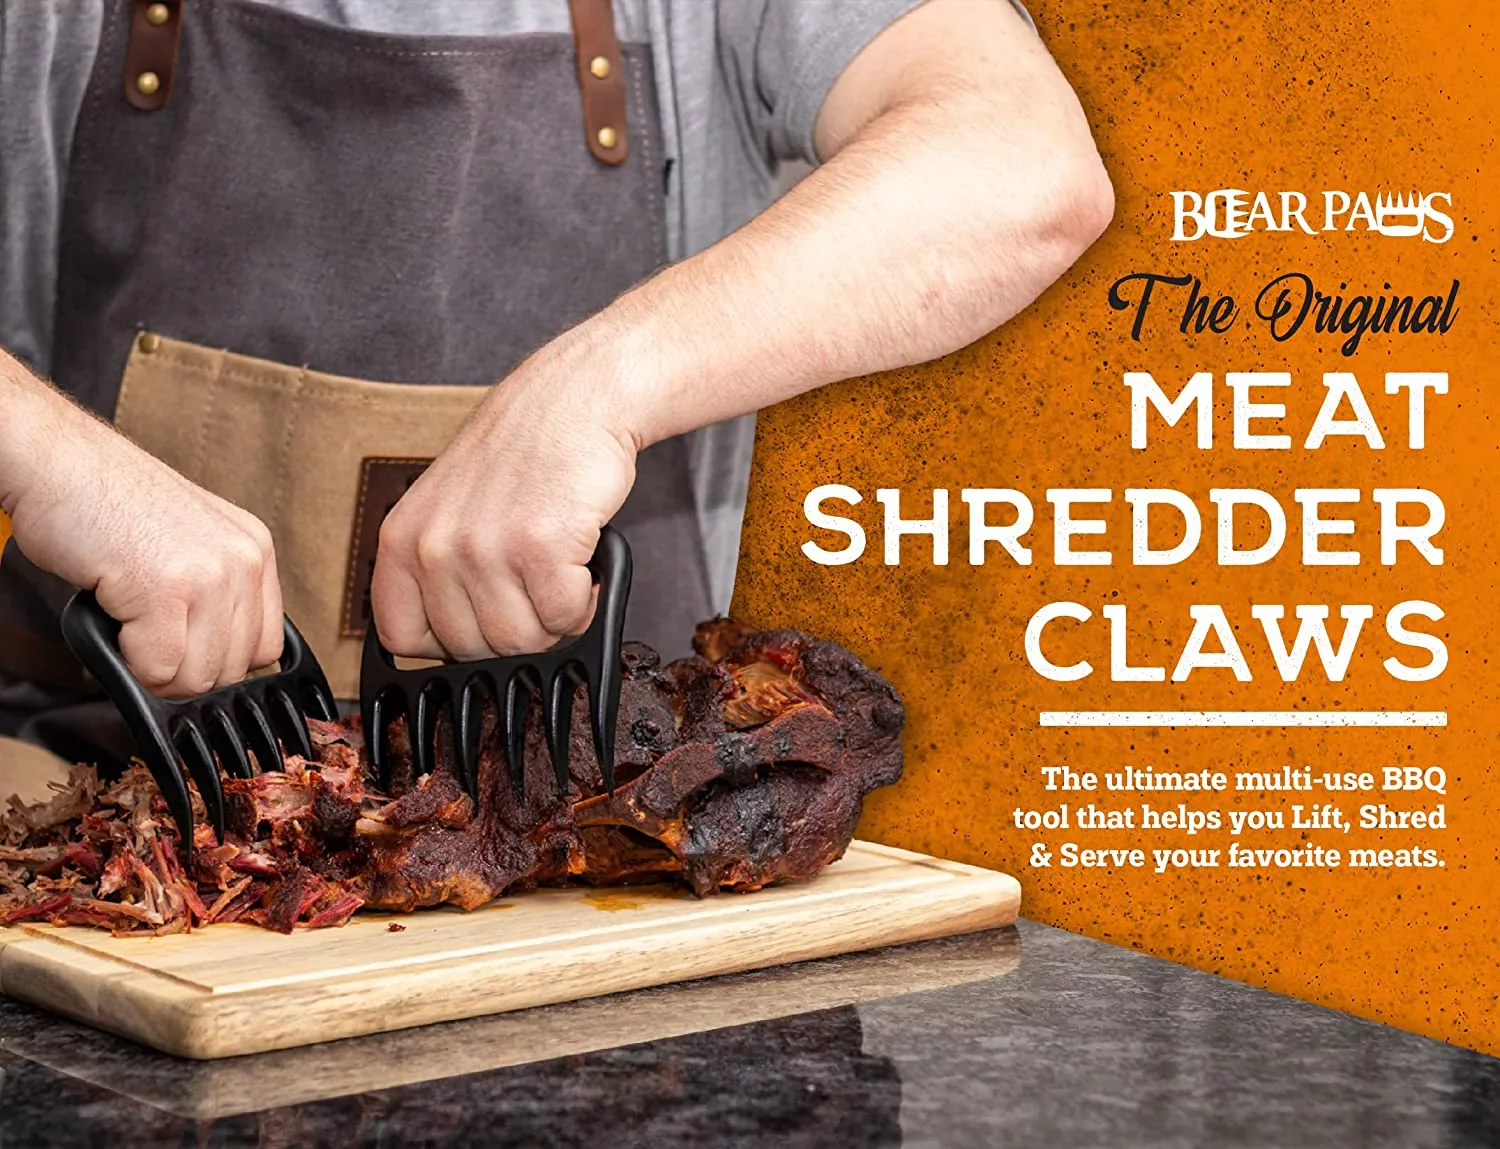 Bear Paws Meat Shredding Claws is the ultimate multi use BBQ tool to shred meat